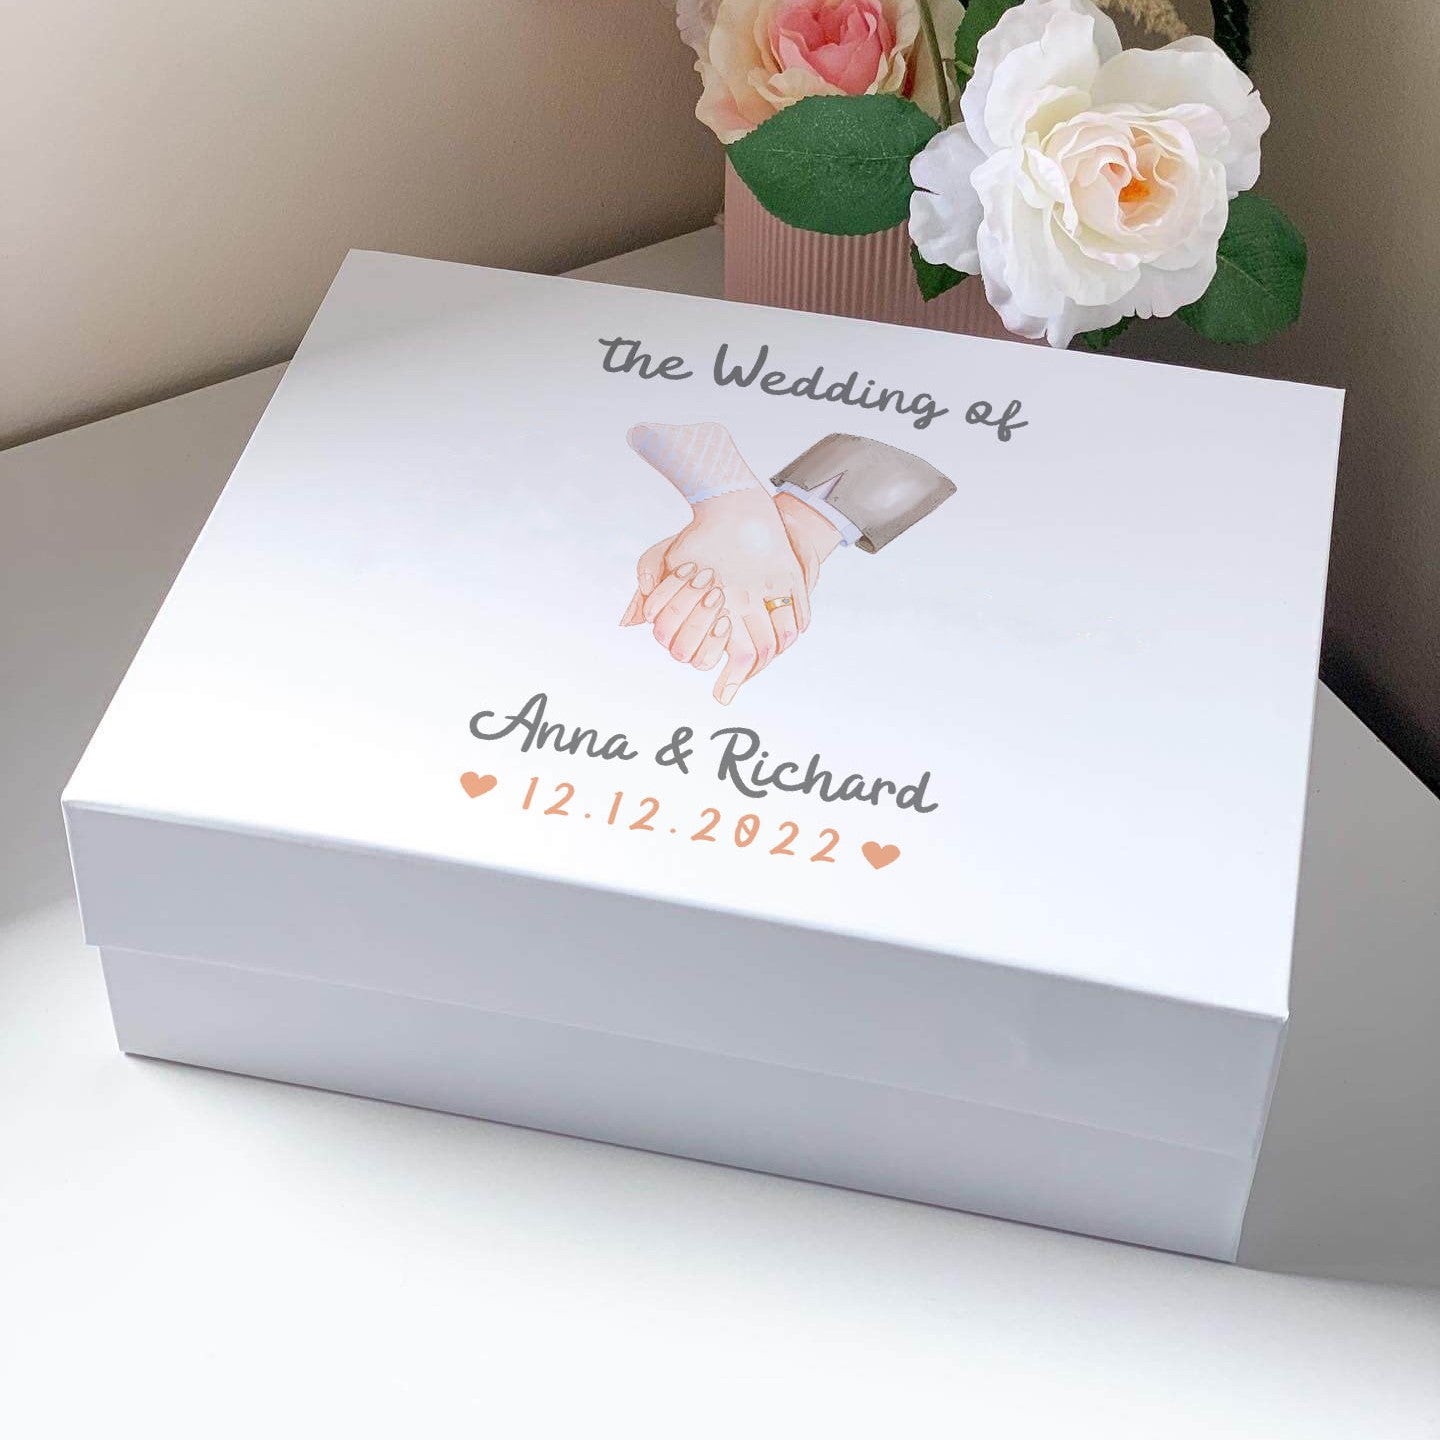 The Wedding Magnetic Closure Gift Box